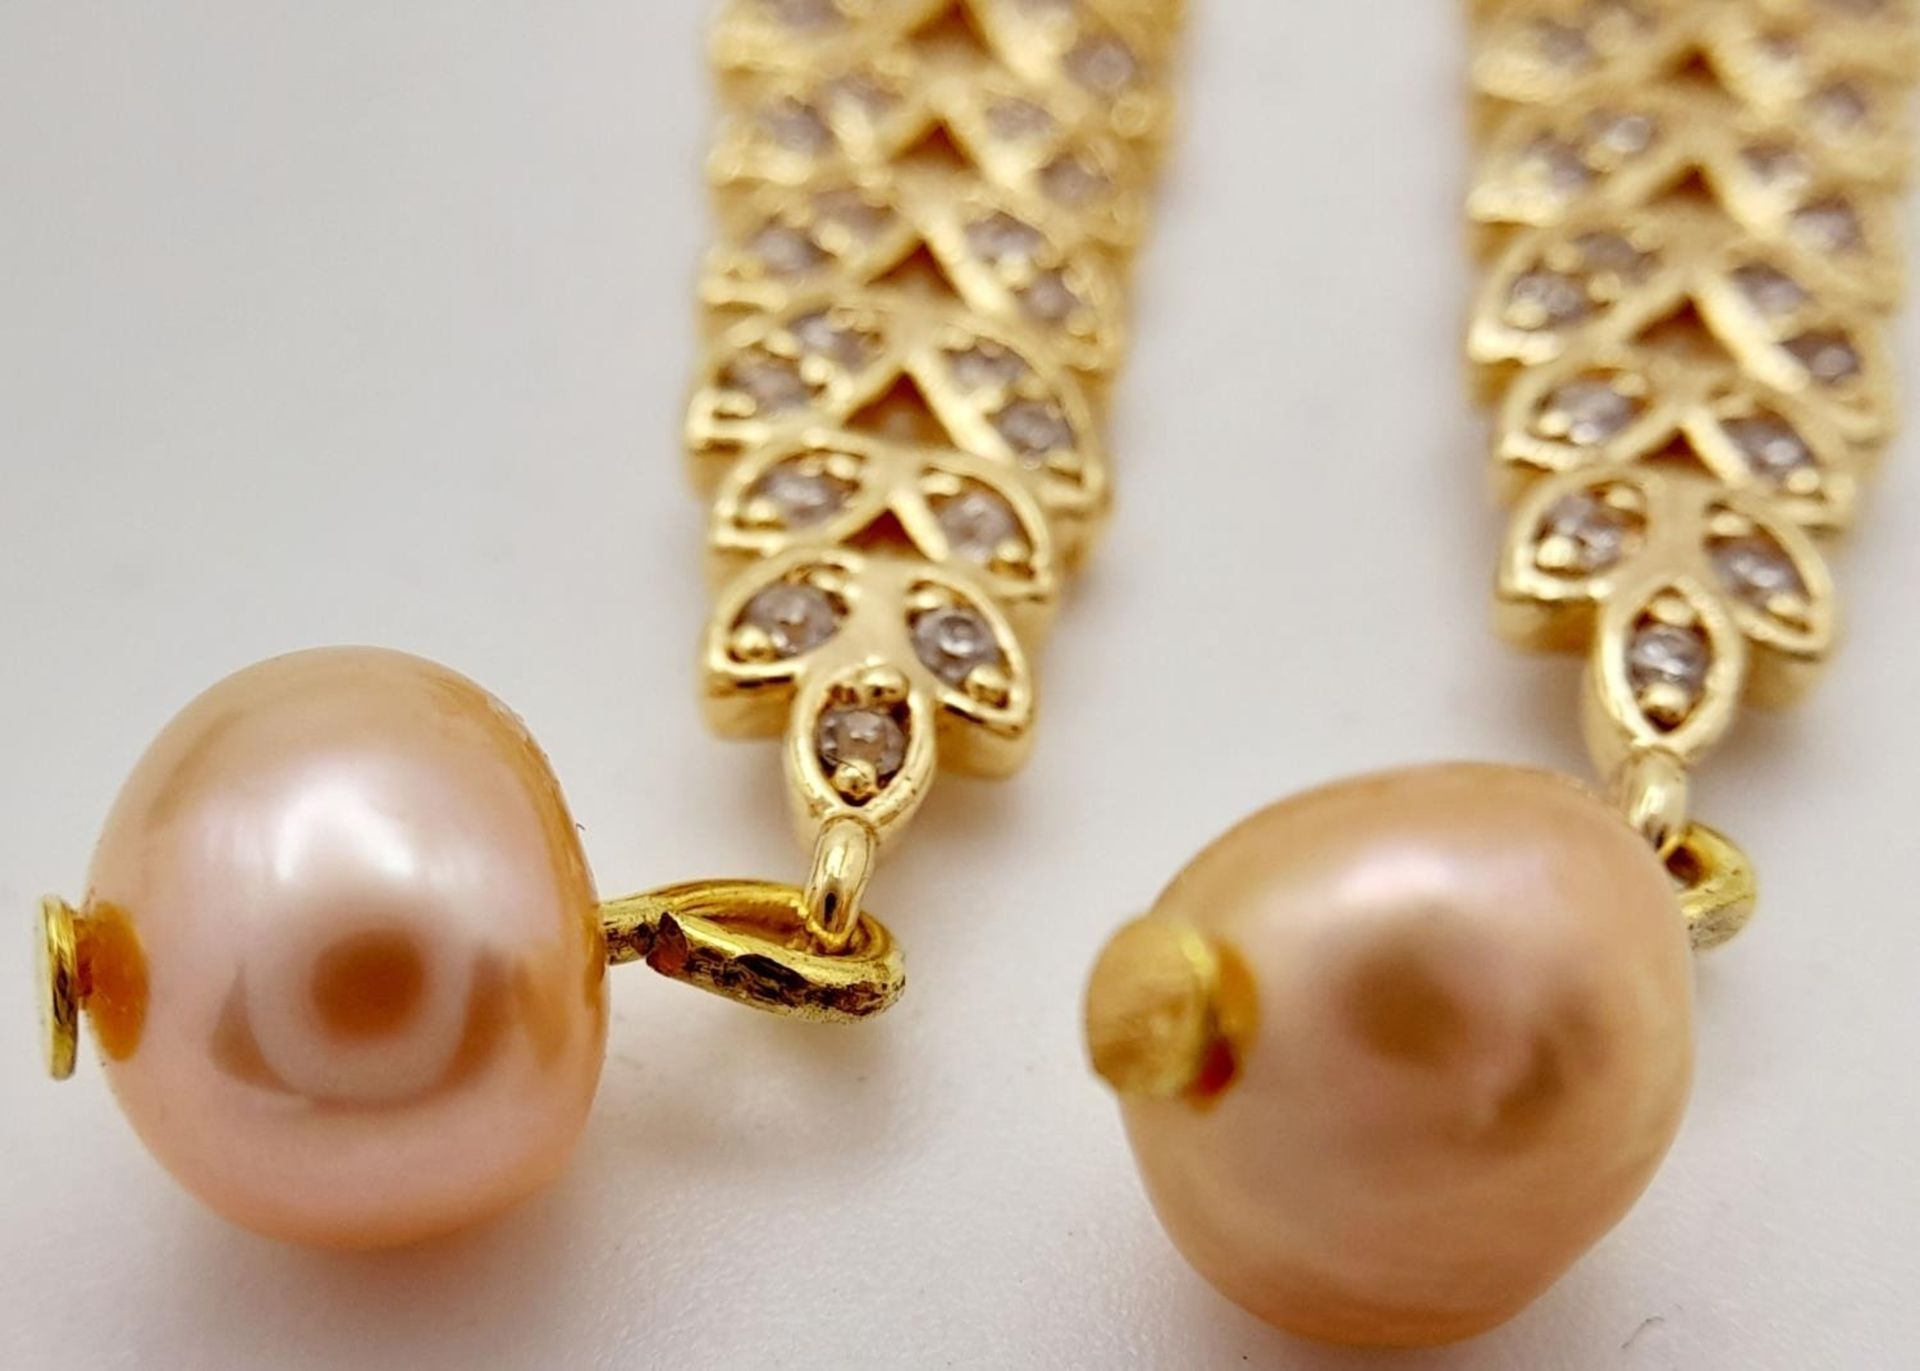 A fabulous gold-plated pair of earrings with cubic zirconia and pink cultured pearls, presented in a - Bild 3 aus 5